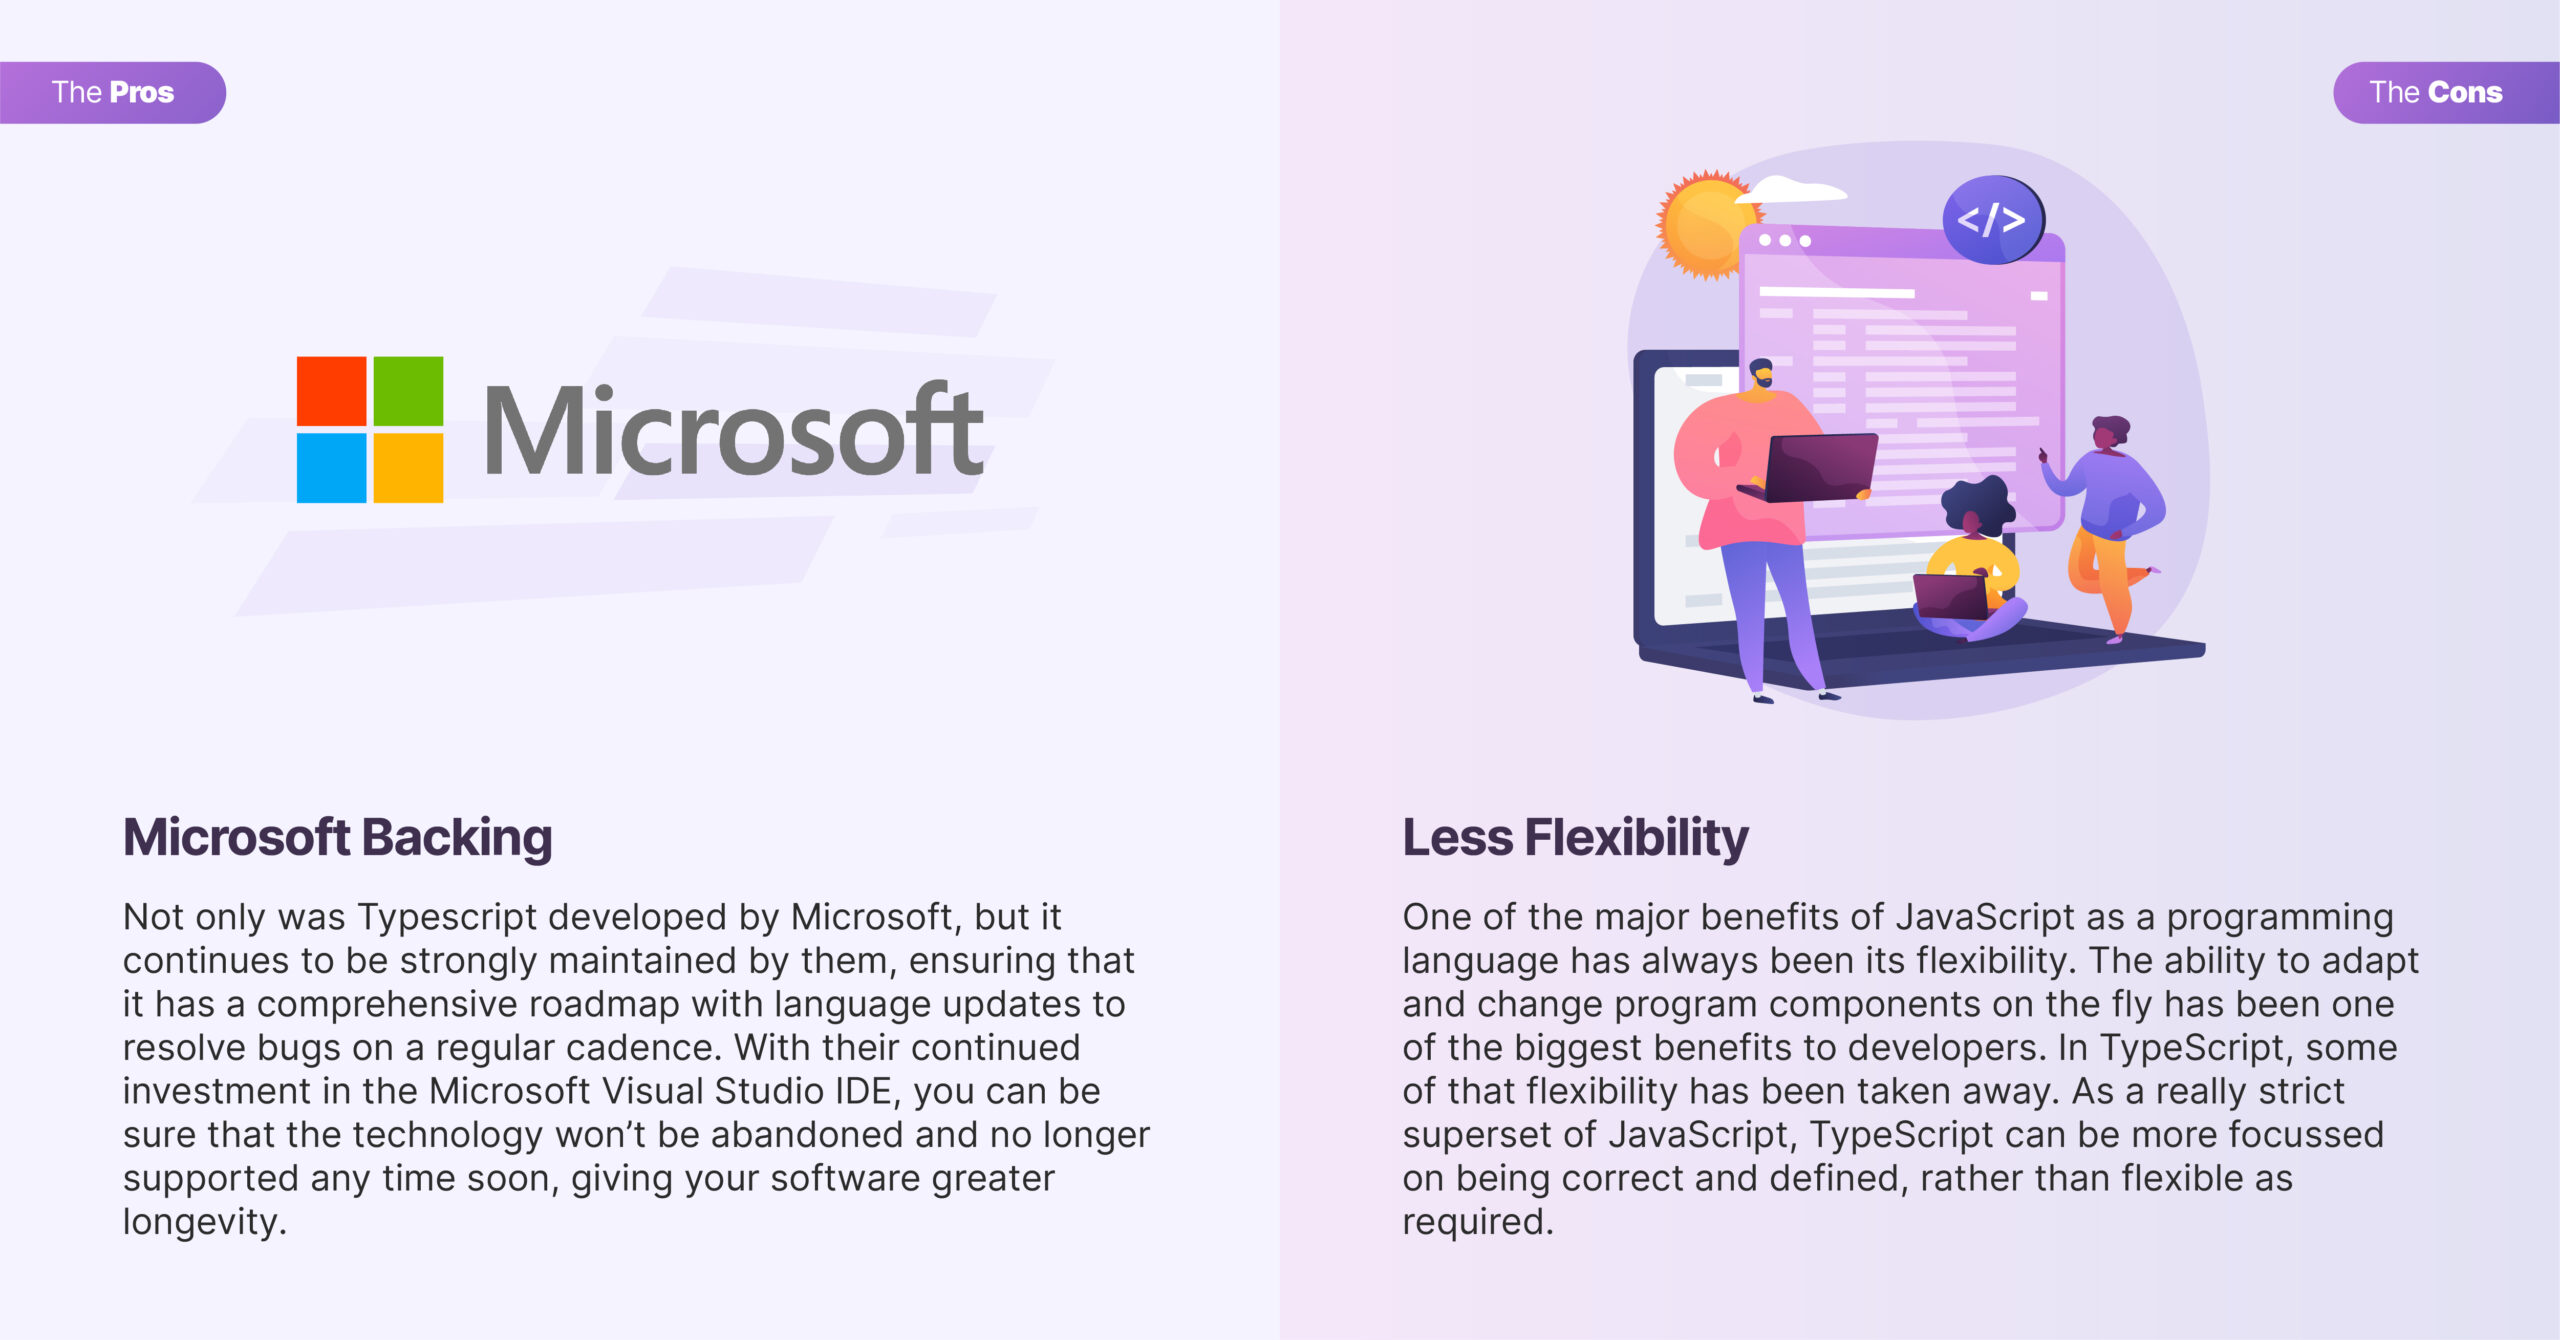 Typescript and Javascript both have their pros and cons - learn